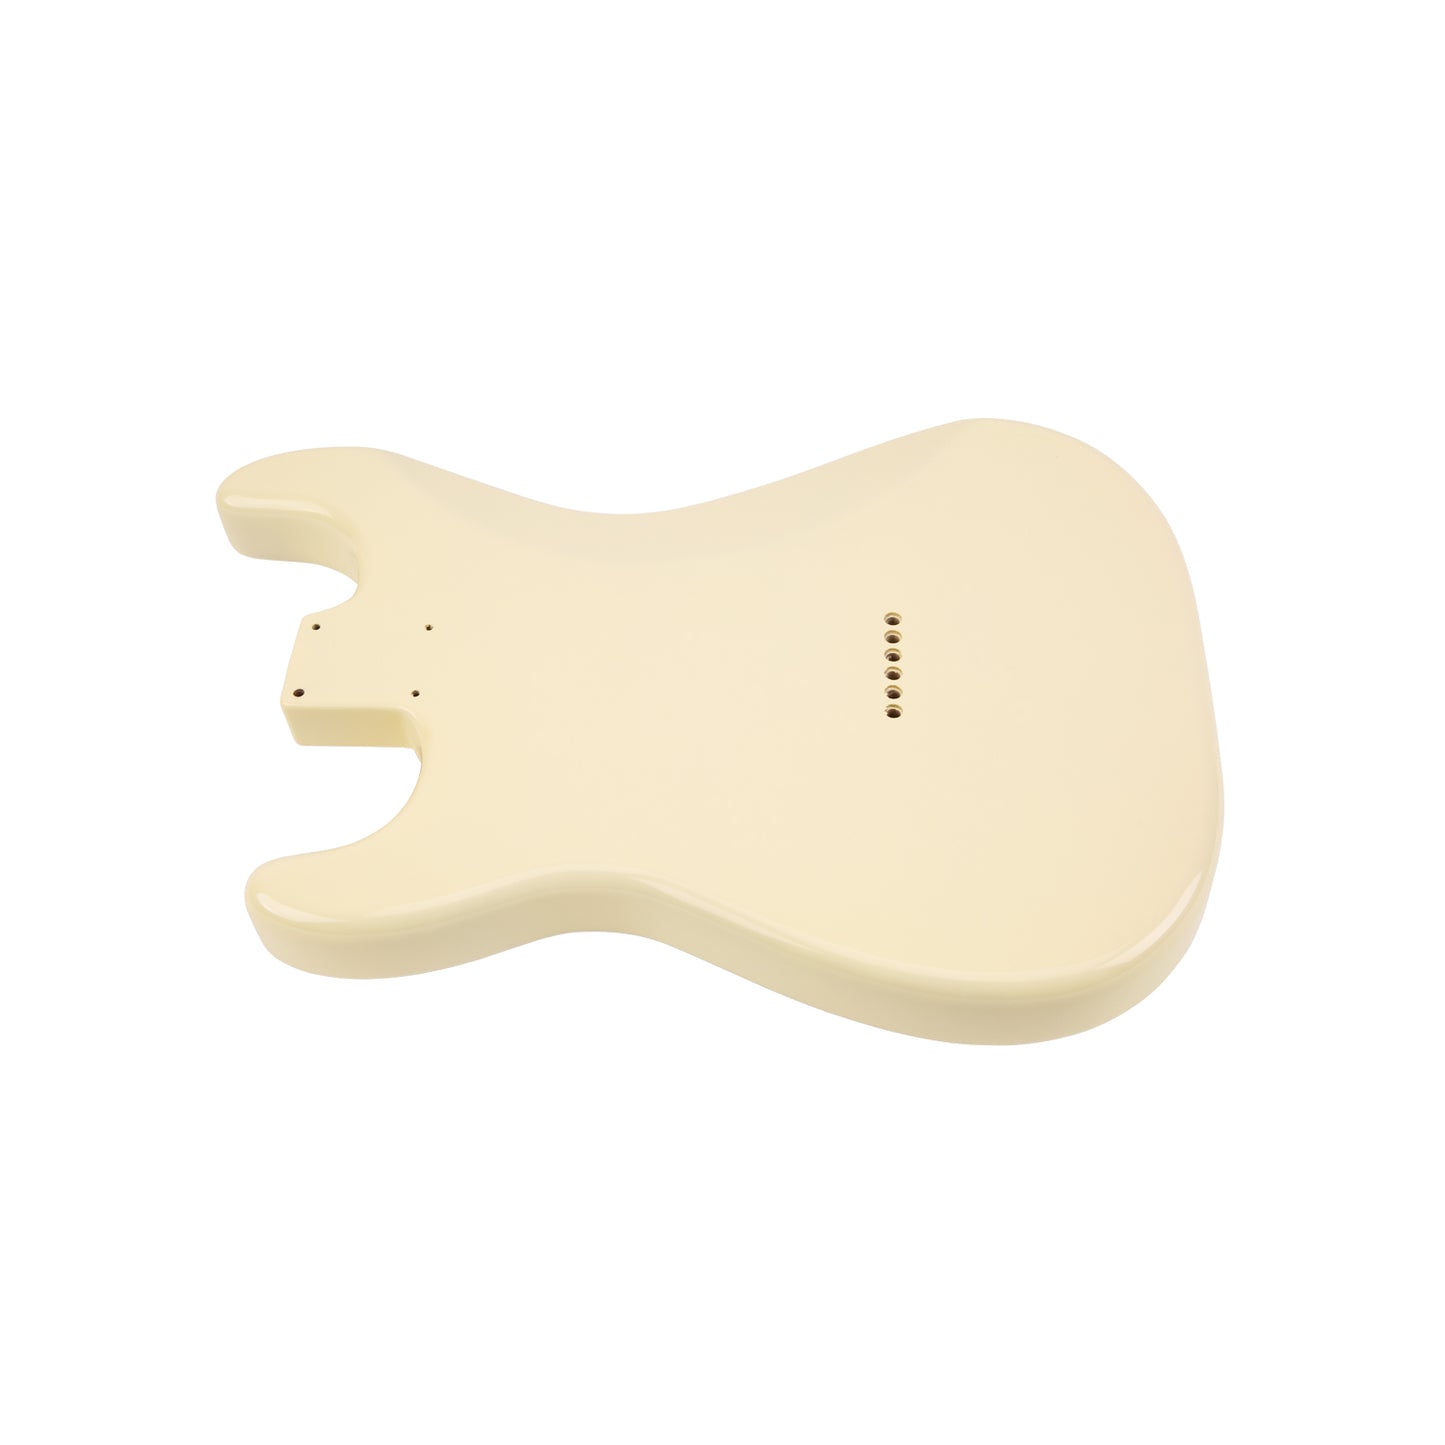 AE Guitars® S-Style Alder Replacement Guitar Body Vintage White